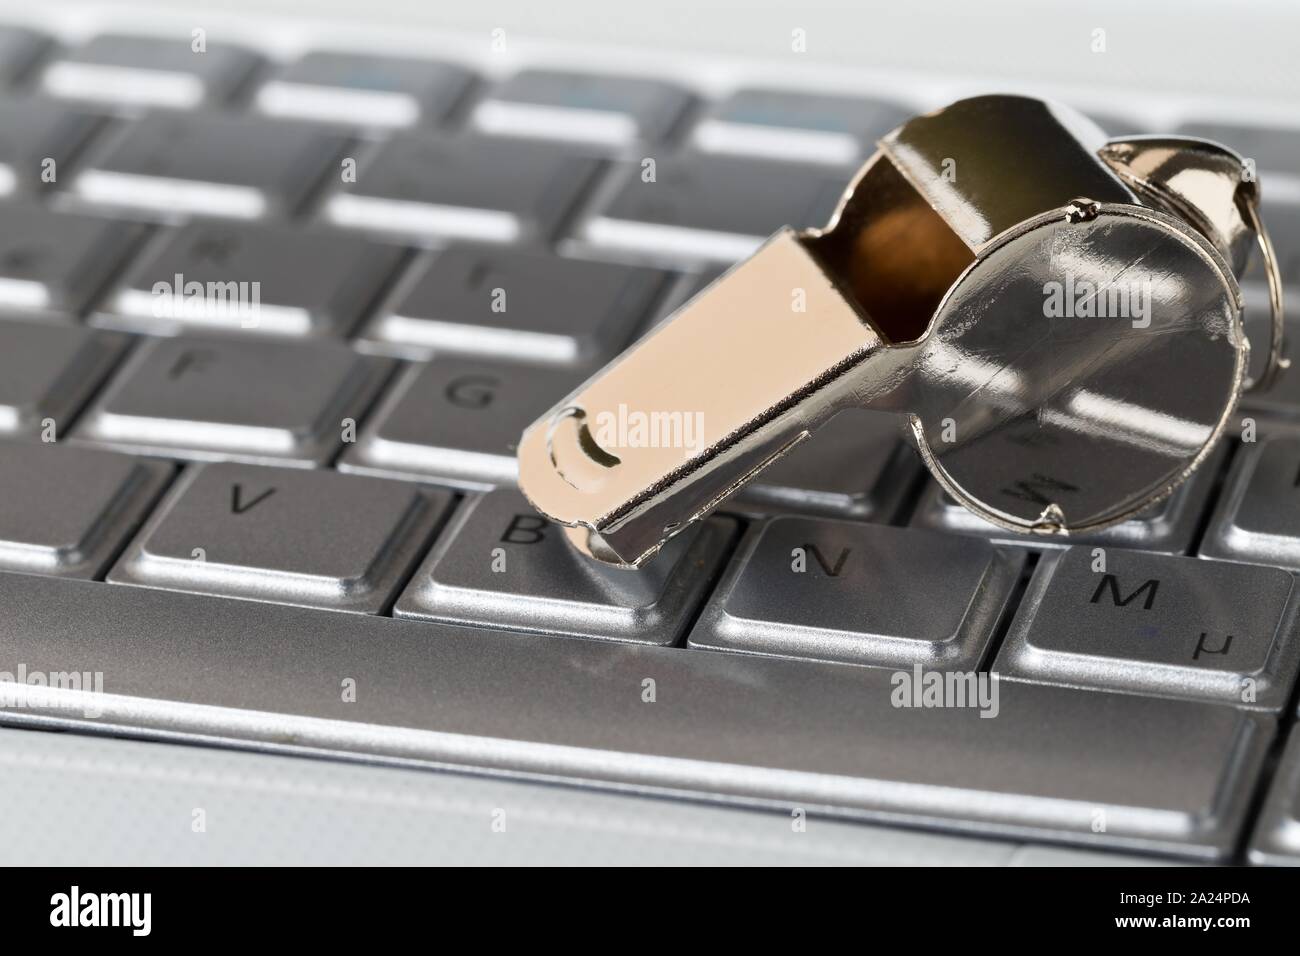 Chrome whistle on top of laptop computer keyboard - whistleblower concept, selective focus Stock Photo